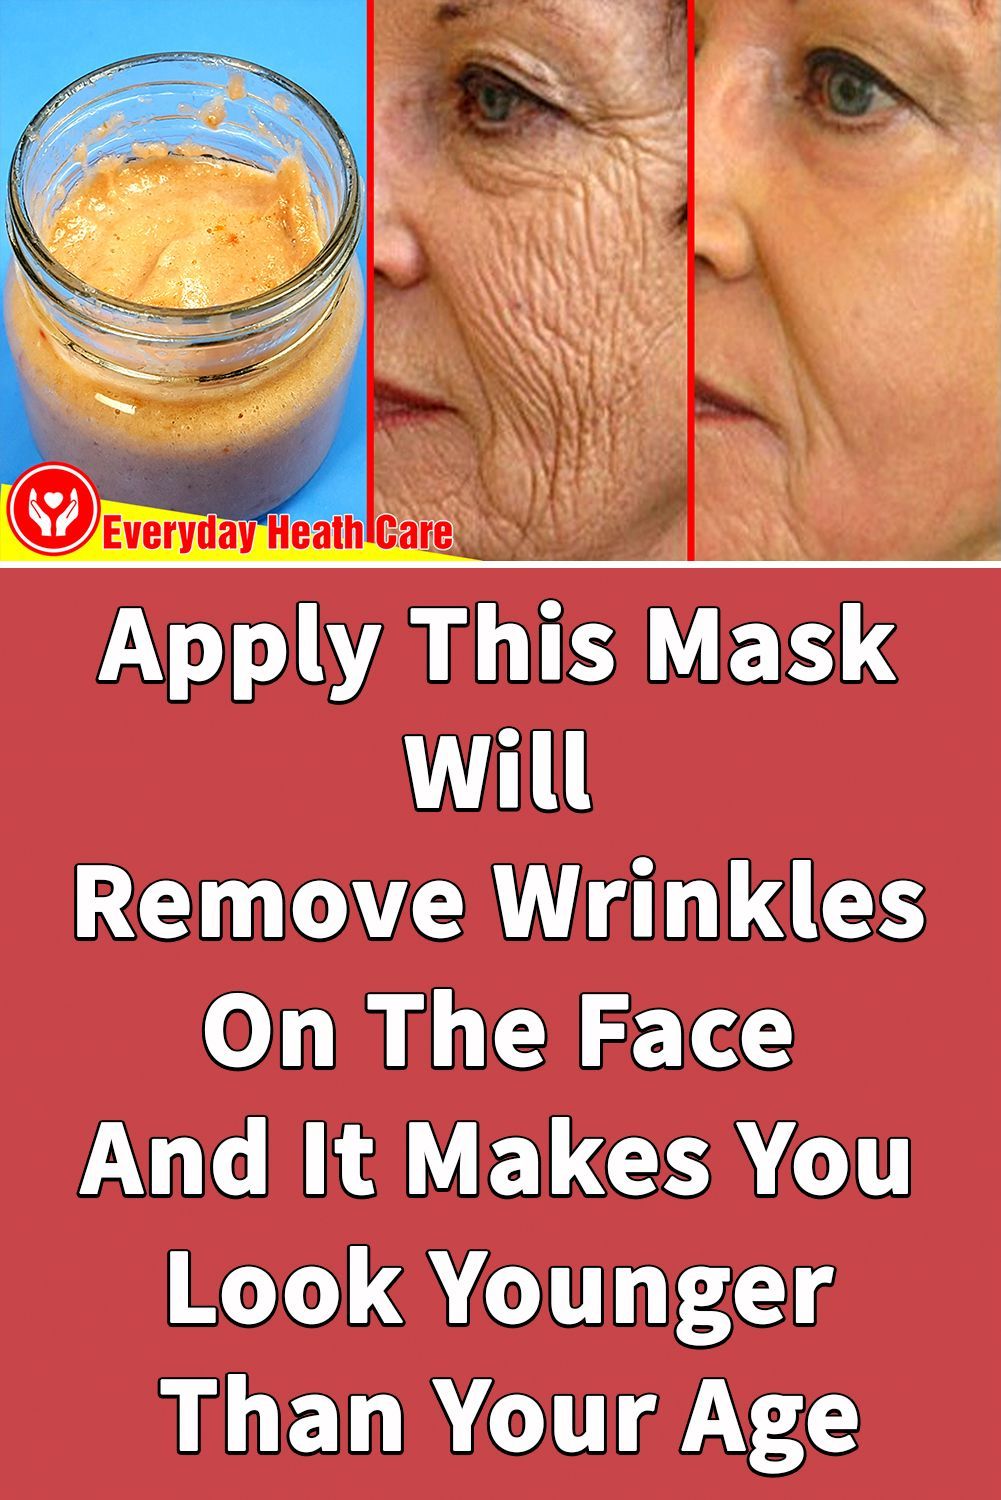 Apply This Mask Will Remove Wrinkles On The Face And It Makes You Look Younger Than Your Age -   18 skin care For Wrinkles natural ideas